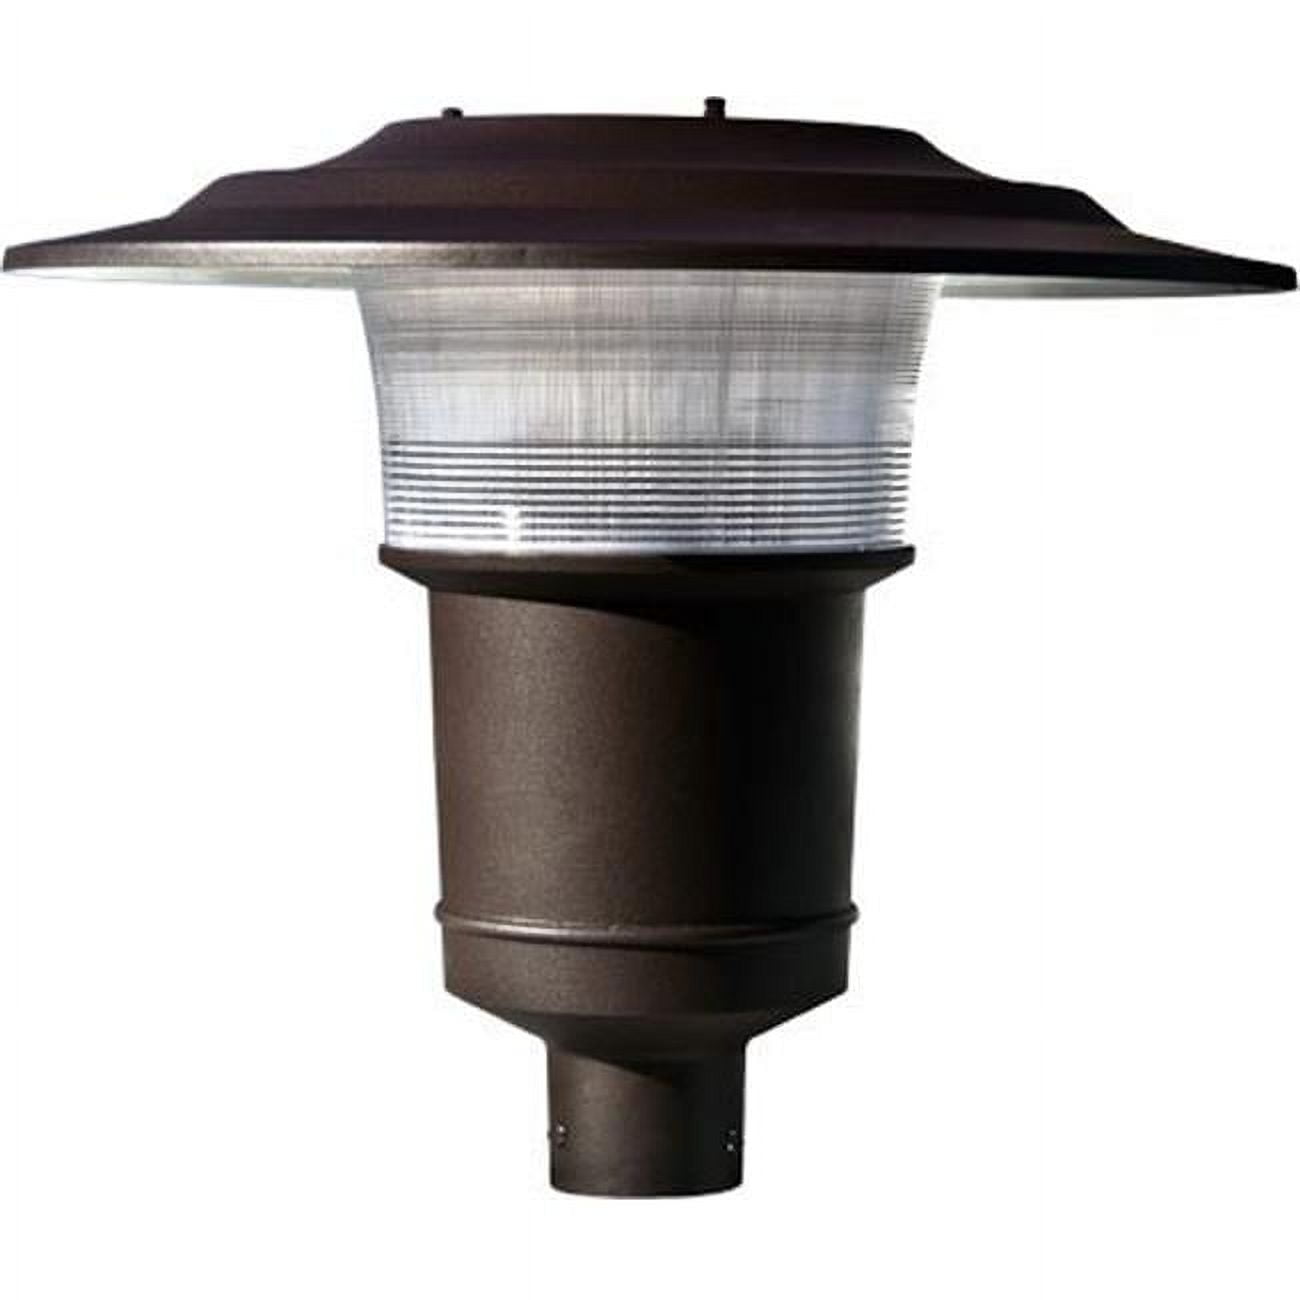 Picture of Dabmar Lighting GM650-BZ Powder Coated Cast Aluminum Architectural Post Top Light Fixture, Bronze - 19.50 x 23.13 x 23.13 in.